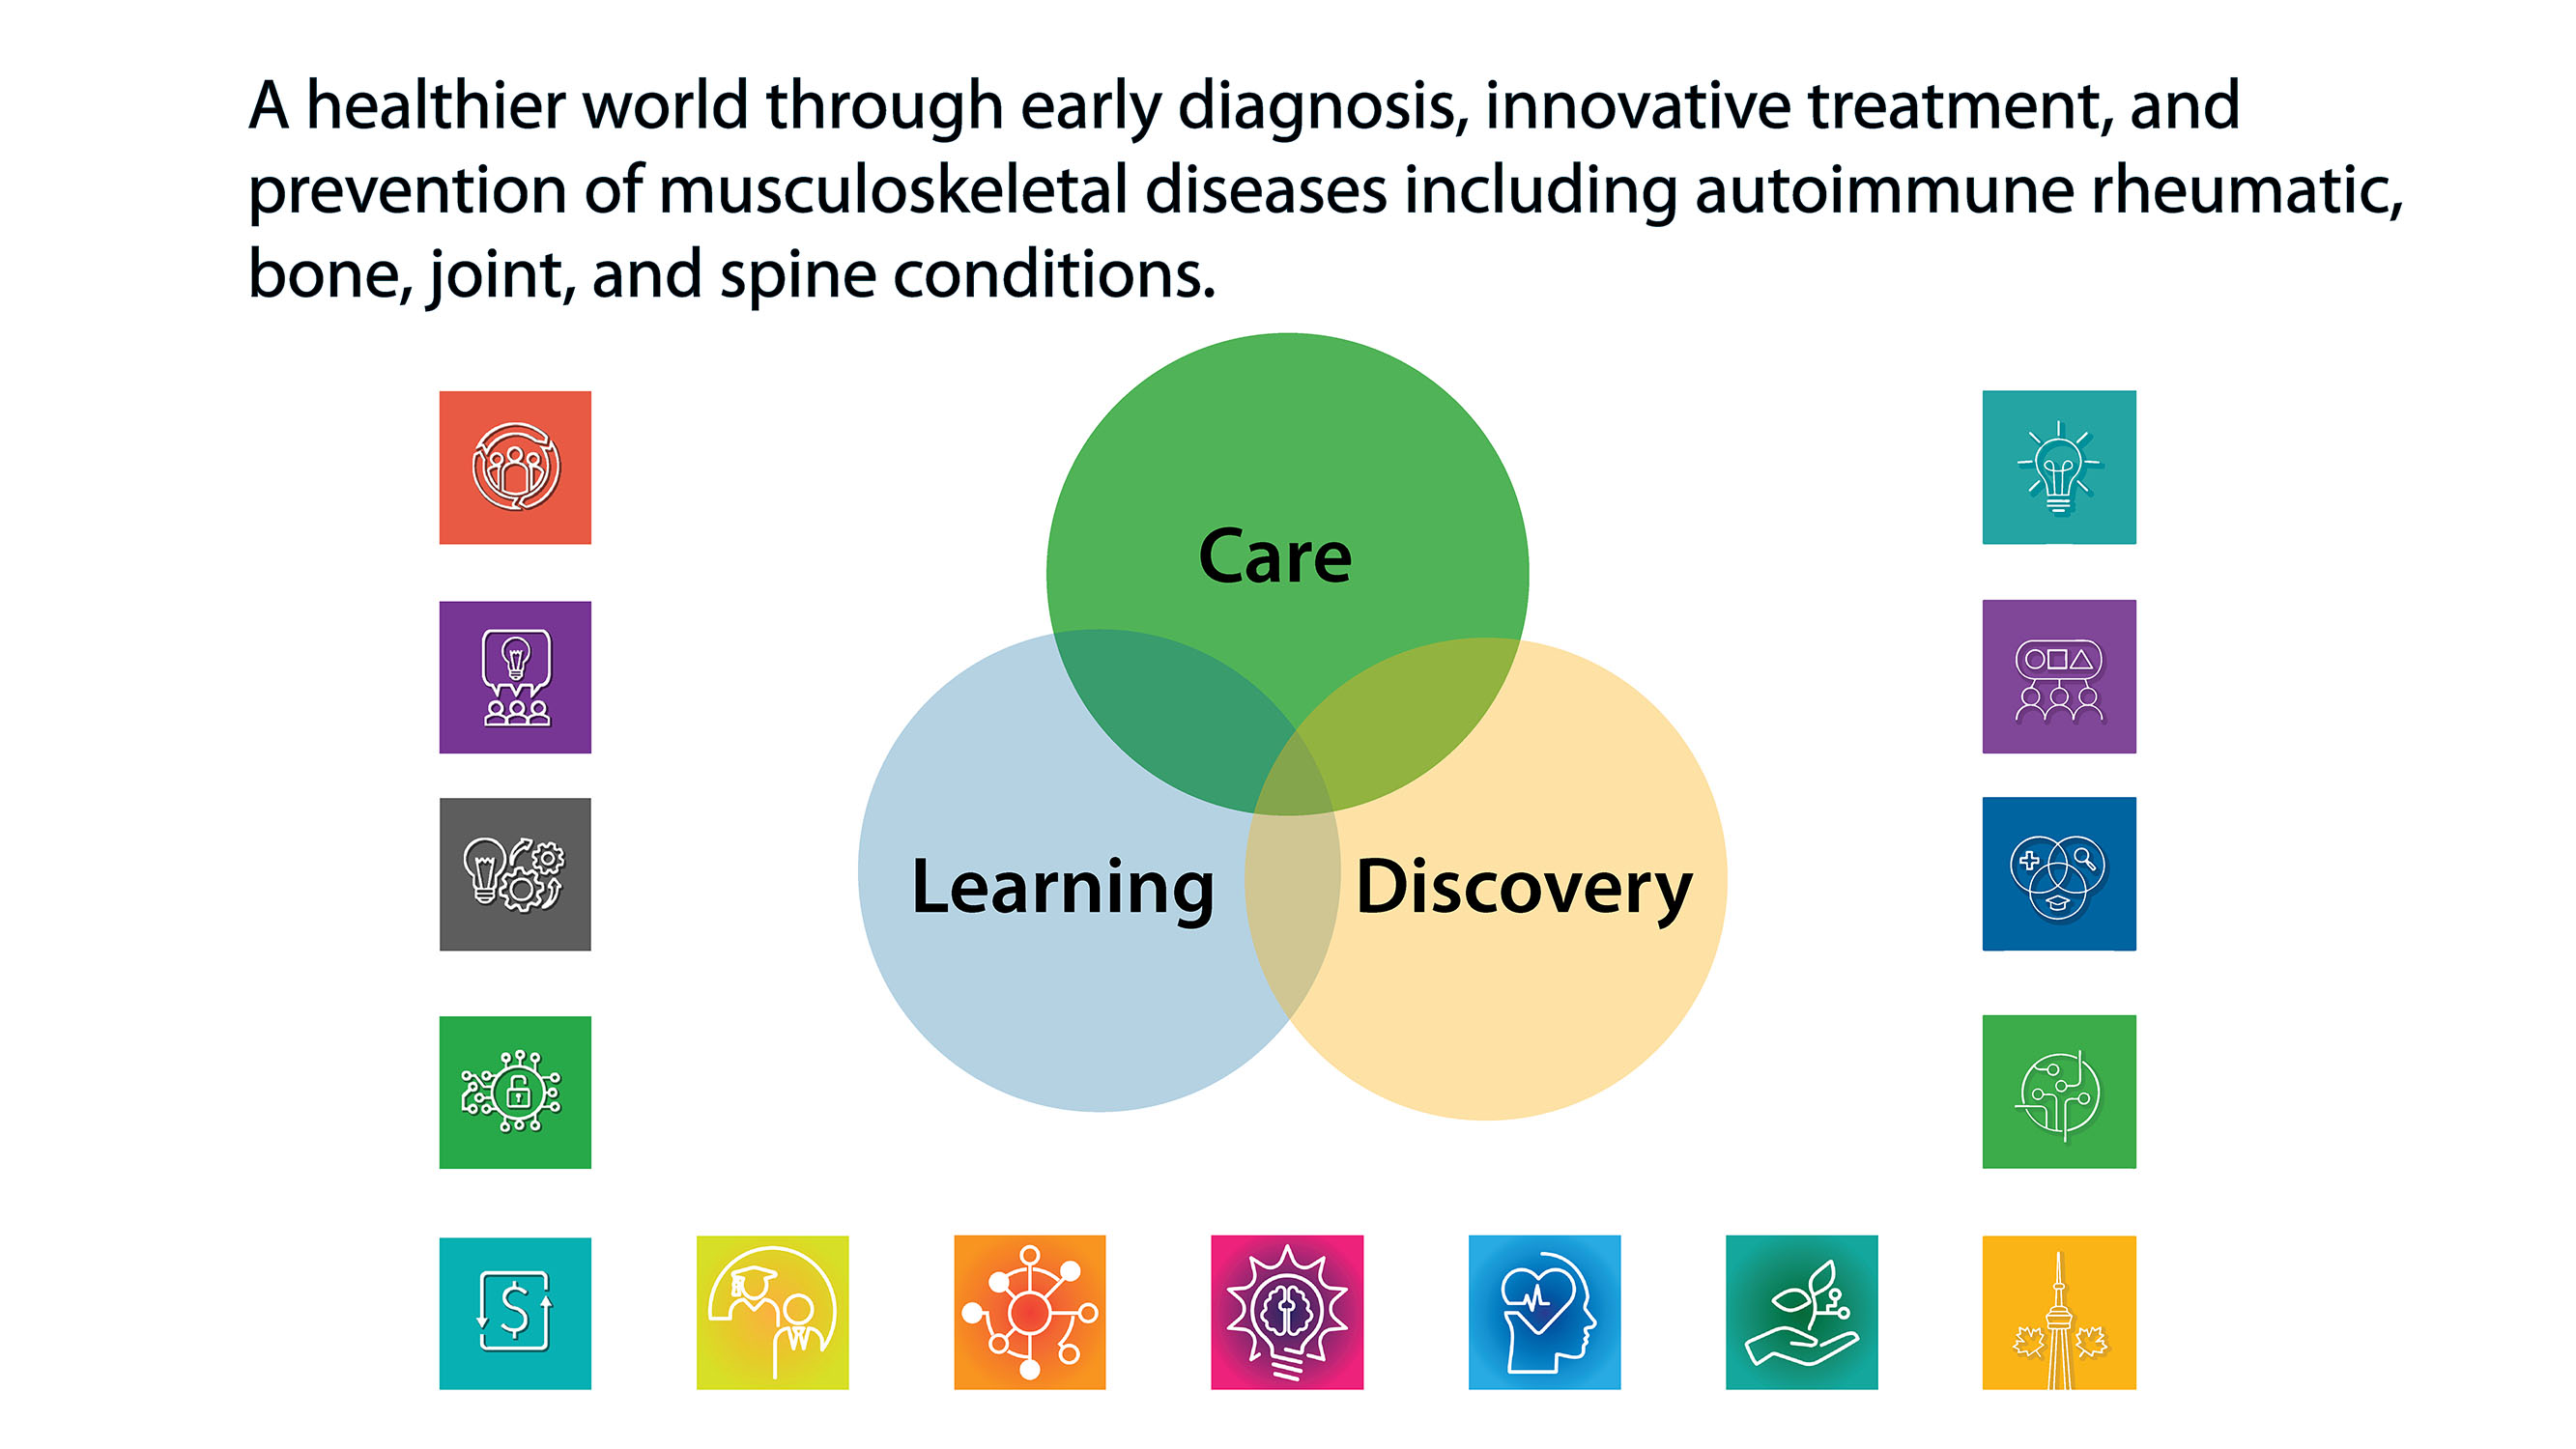 A healthier world through early diagnosis, innovative treatment and prevention of musculoskeletal diseases including autoimmune rheumatic, bone, joint, and spine conditions